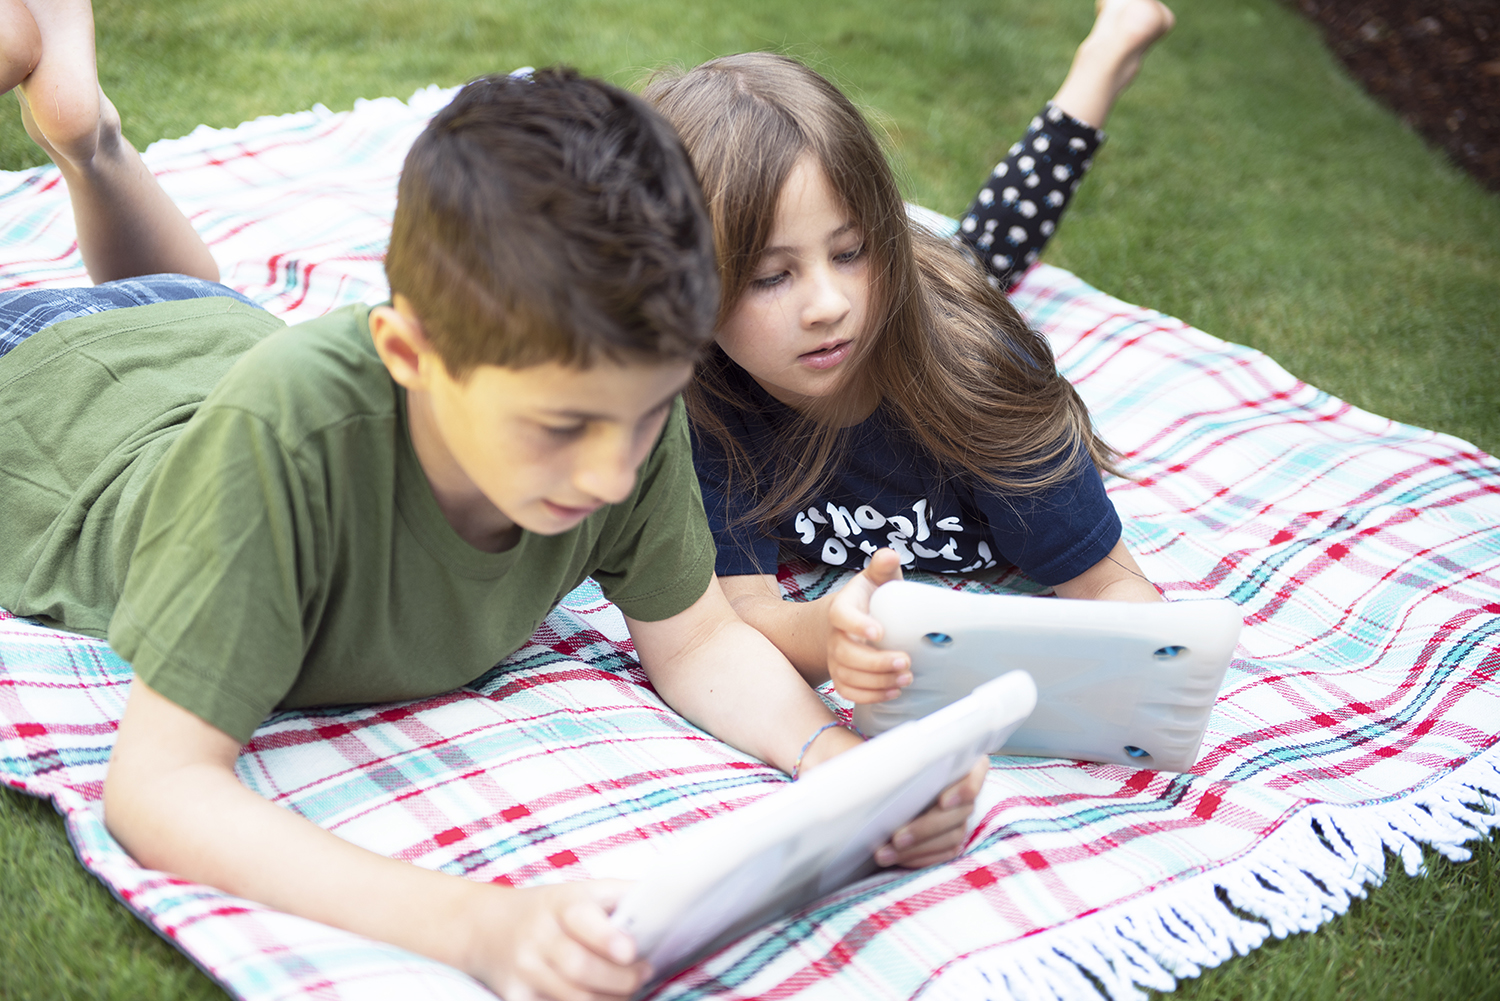 image showing two children on a blanket looking at tablets